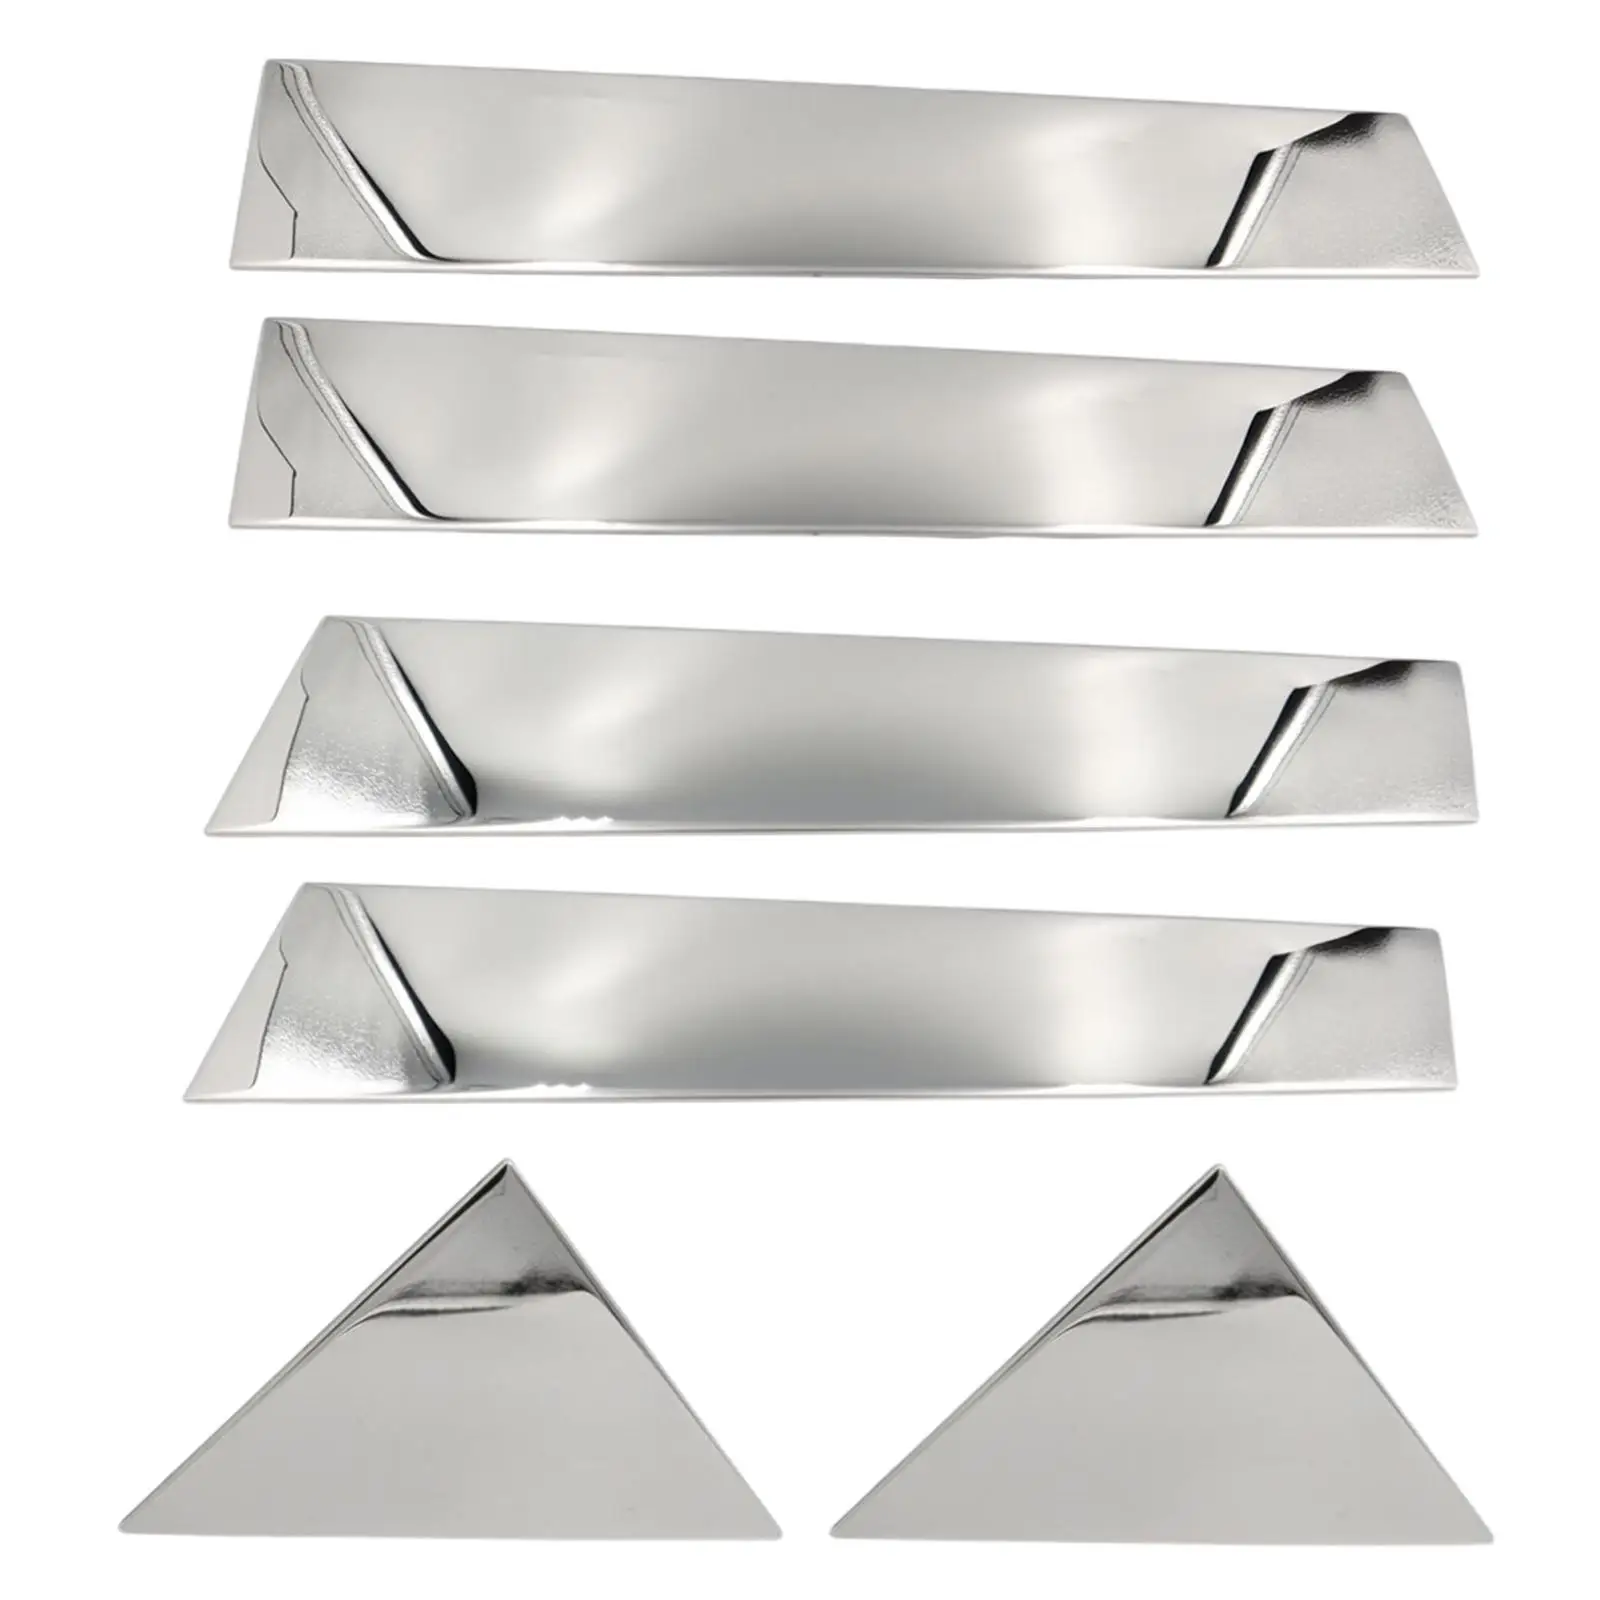 6Pcs Vehicle Door Window  / Accessories 304 Stainless Steel Decoration Chrome Covers/ 0 2005-2010/